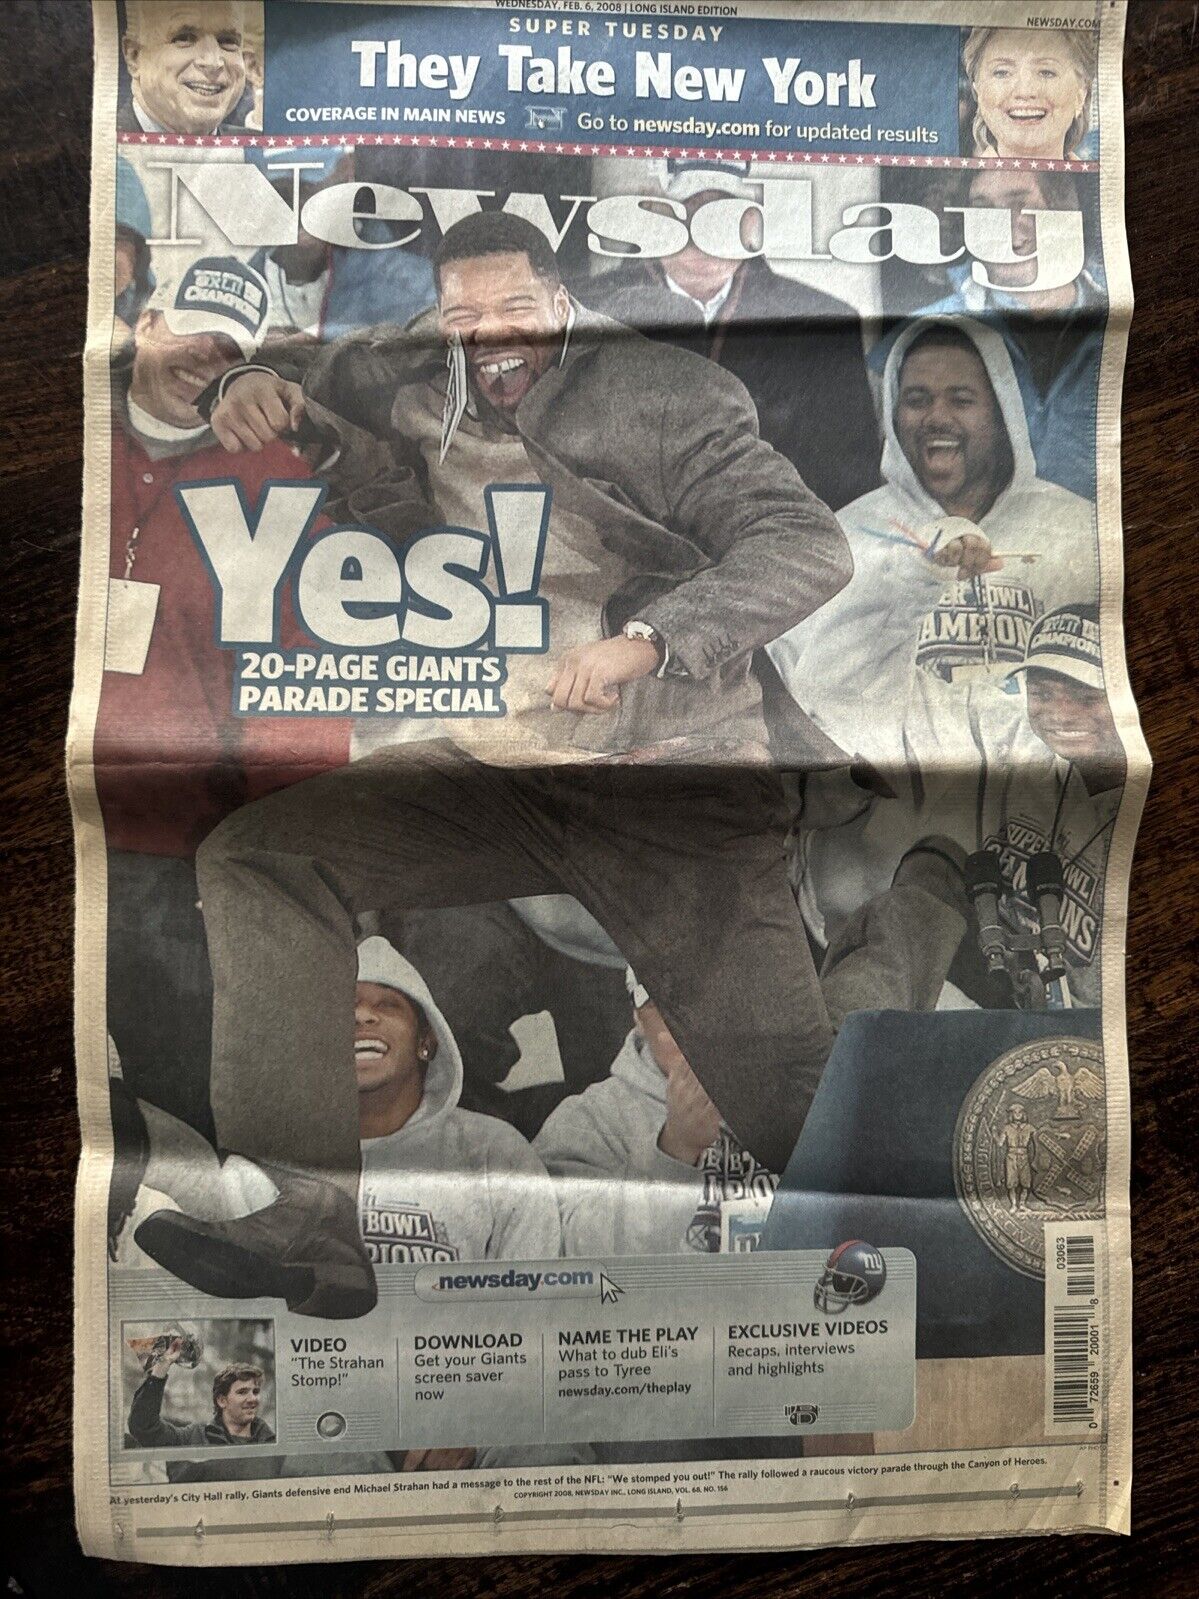 New York Giants Newsday newspaper Feb 6 2008, 20 Page Parade Special